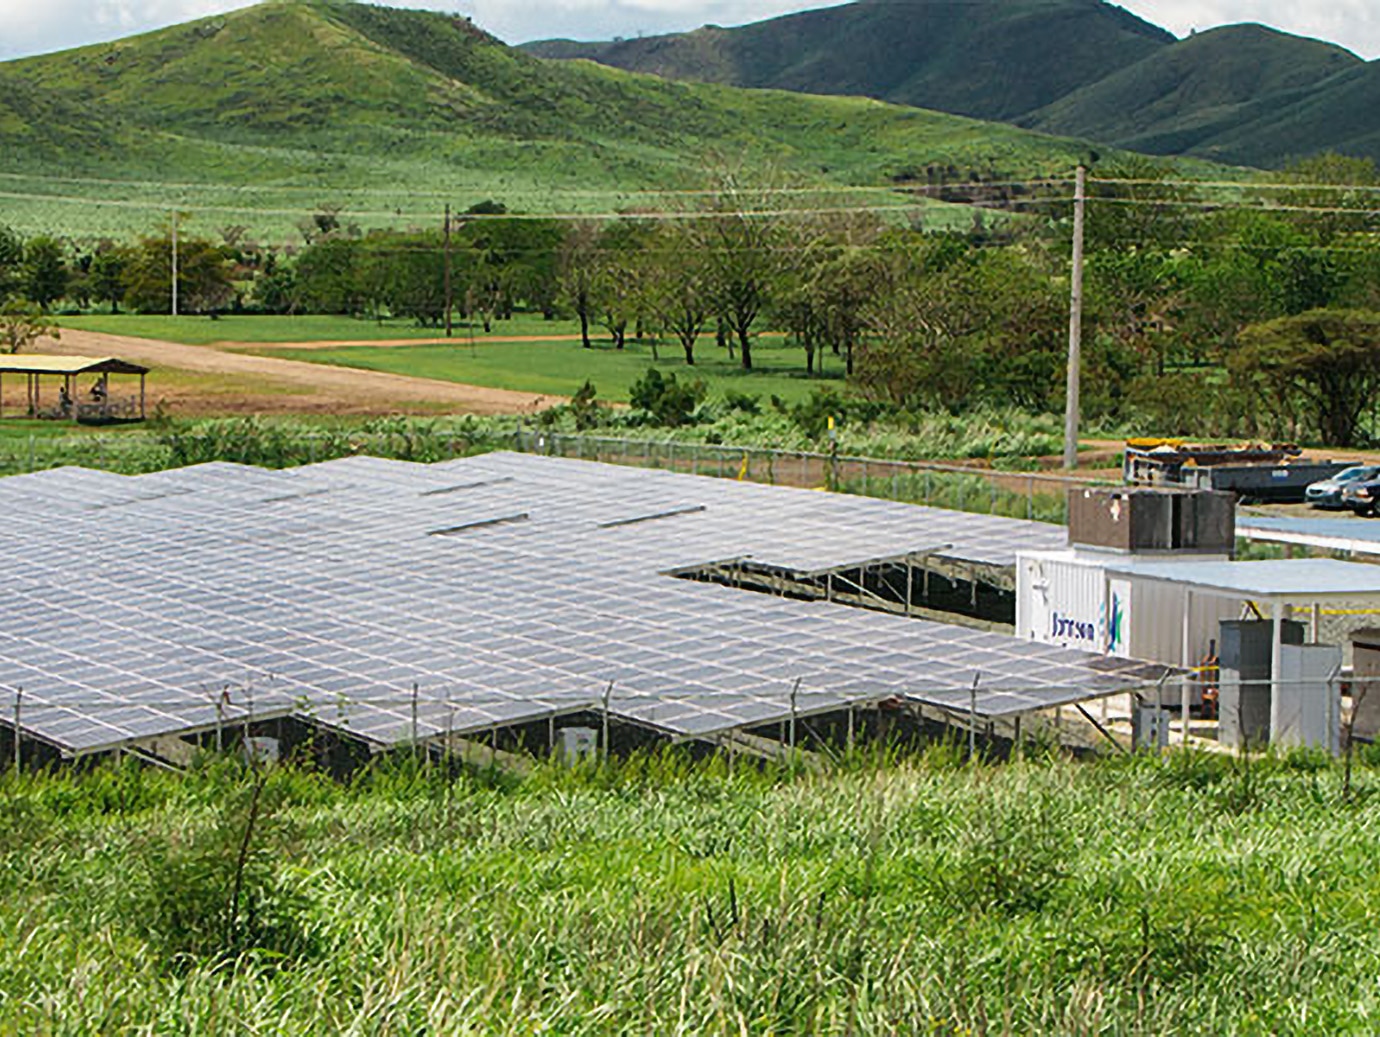 Solar panels set up in a grassy field with lush hills in the background